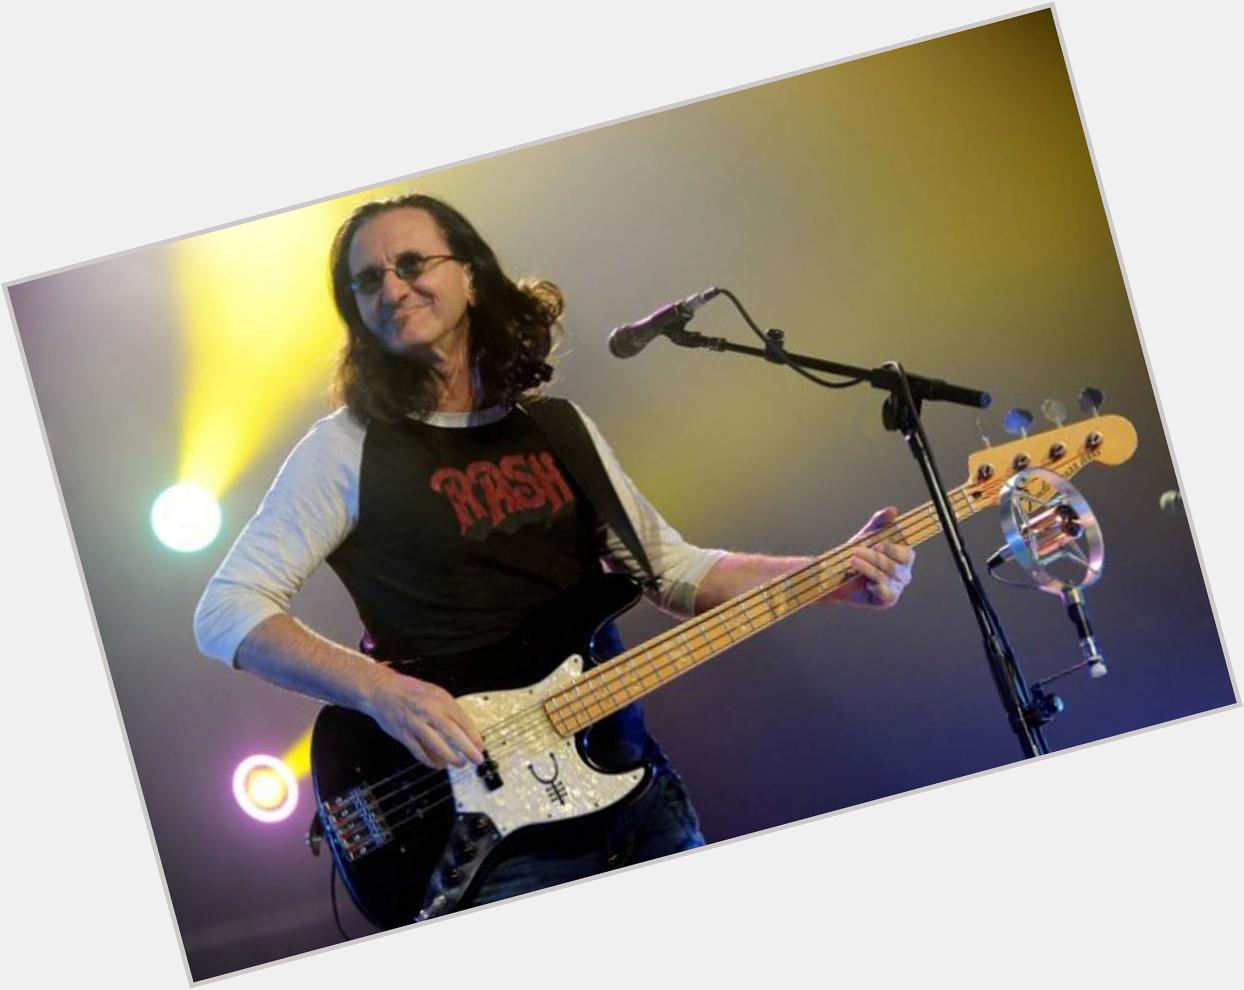 Happy 62nd birthday to Geddy Lee! Here are 10 of his best songs to help celebrate:  